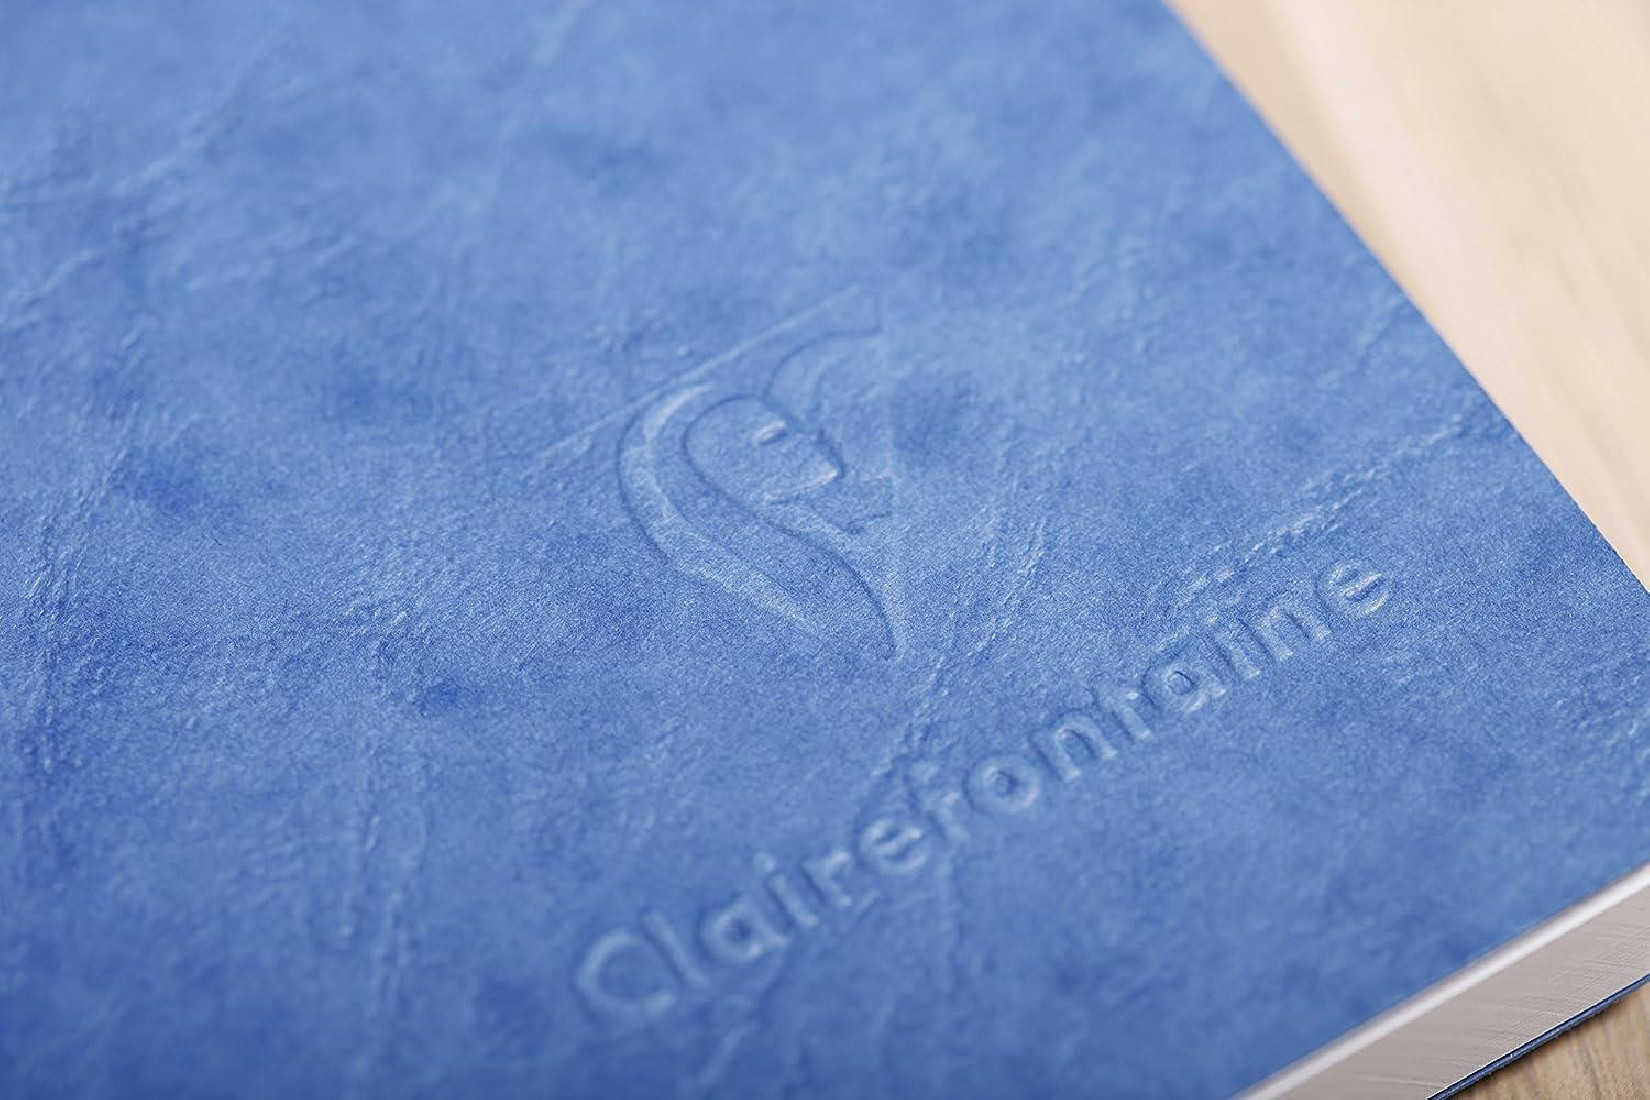 Clairefontaine Rhodia Age Bag 733161C Stitched Notebook A5 14.8 x 21 cm 96 Pages Lined Blue